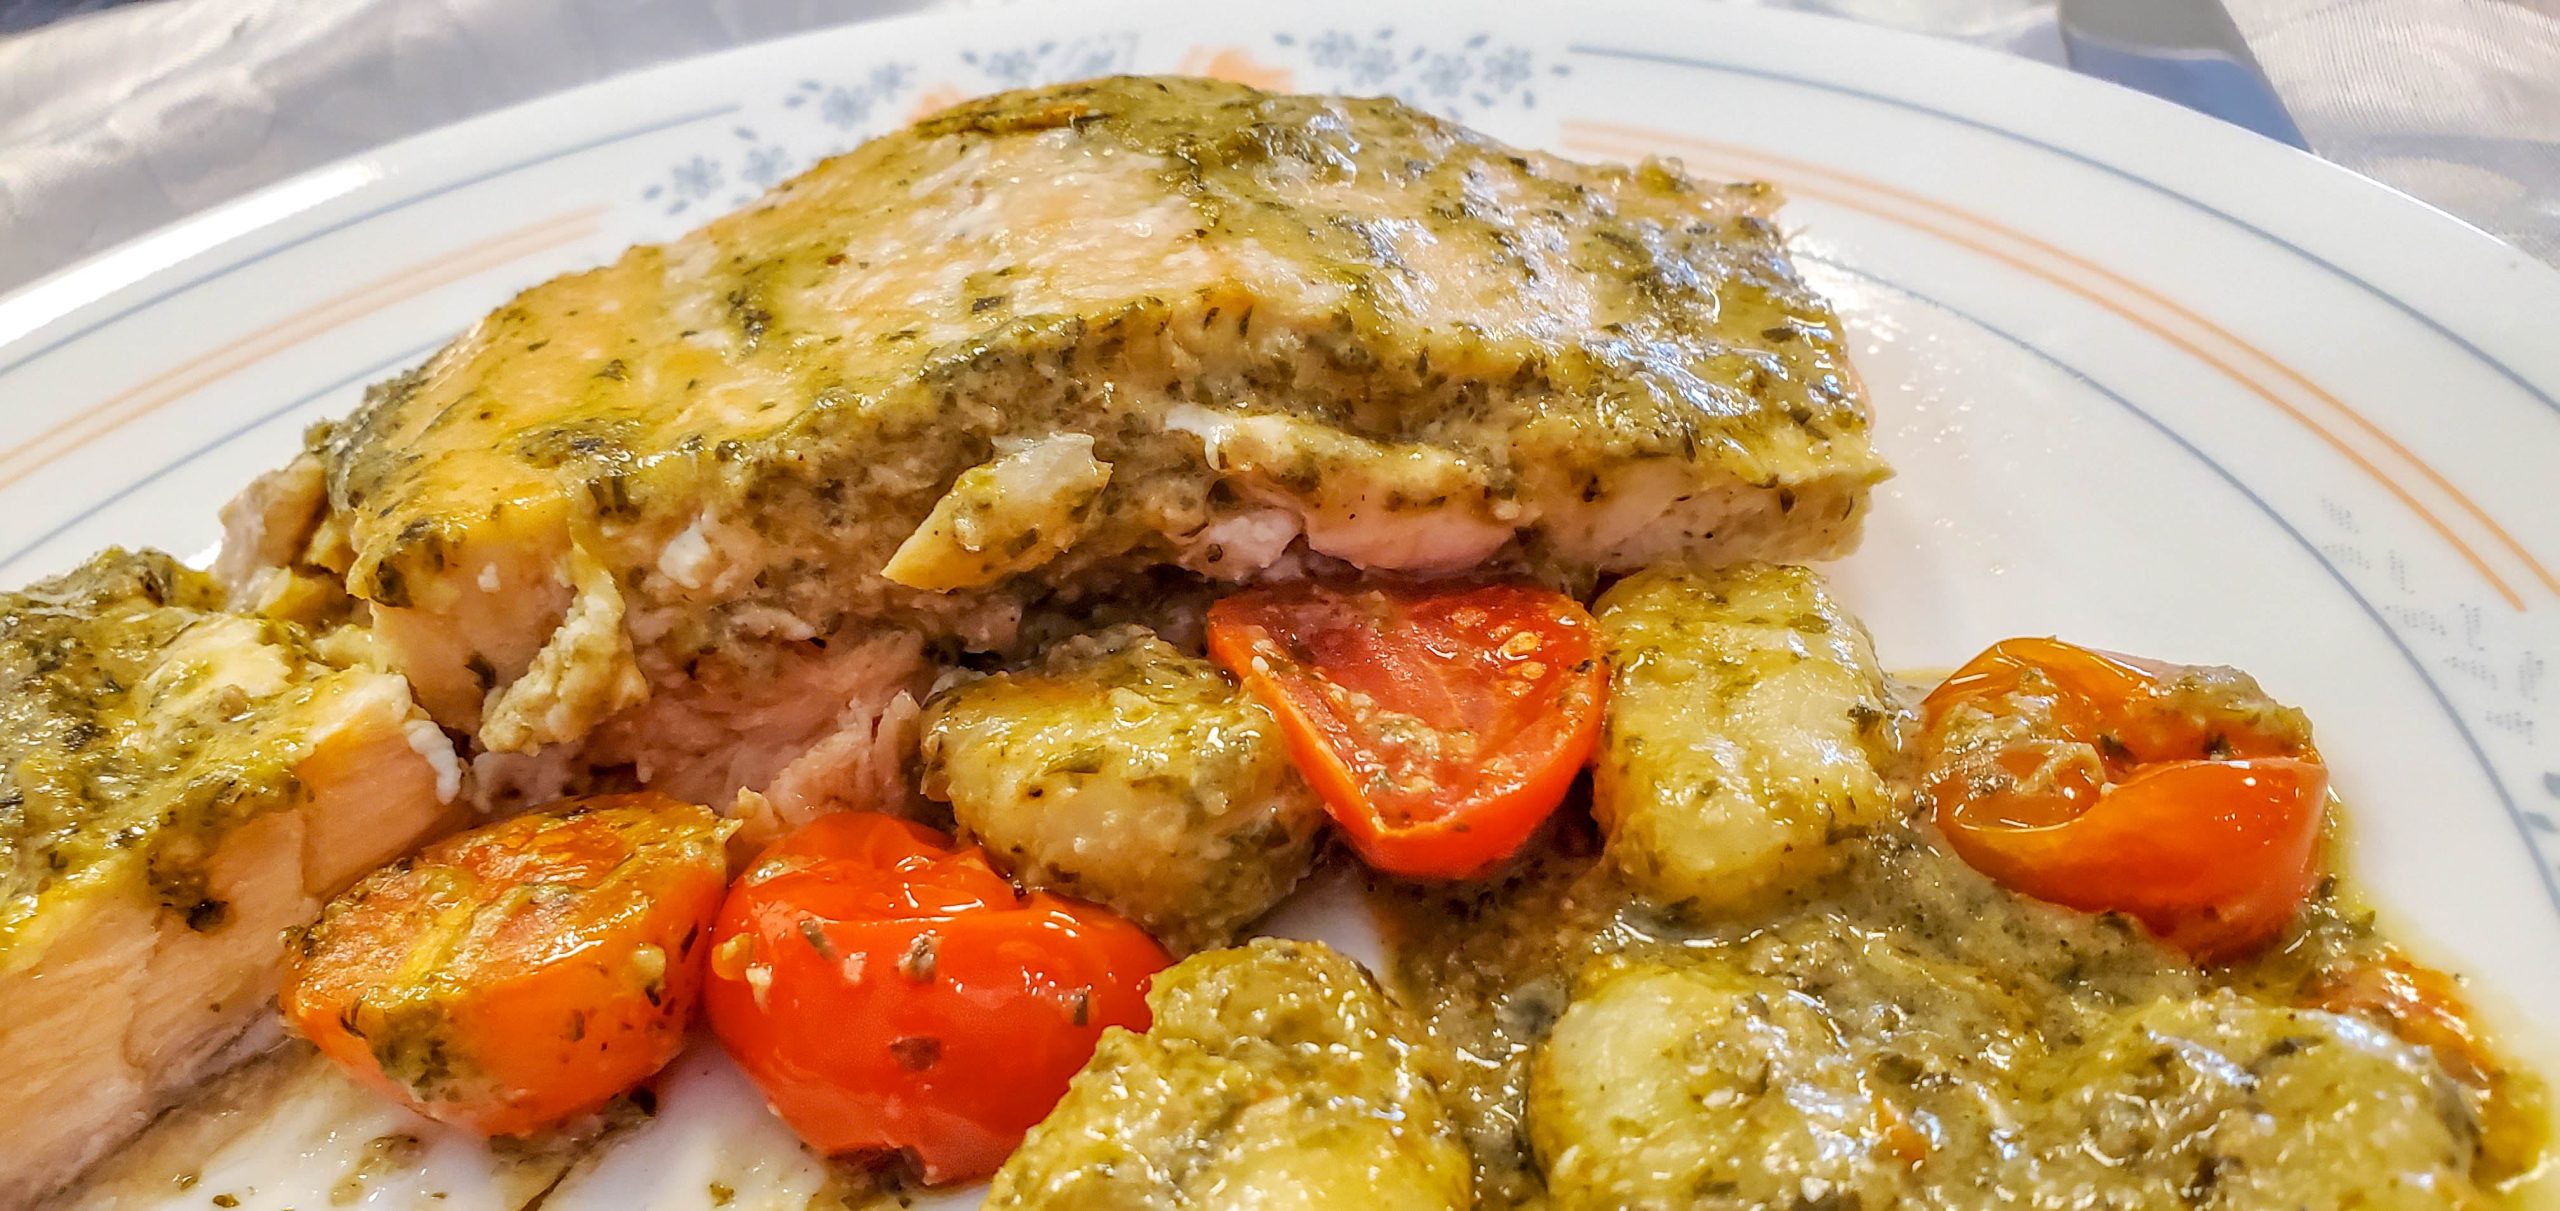 Oven Baked Salmon With Pesto And Cherry Tomatoes Recipe